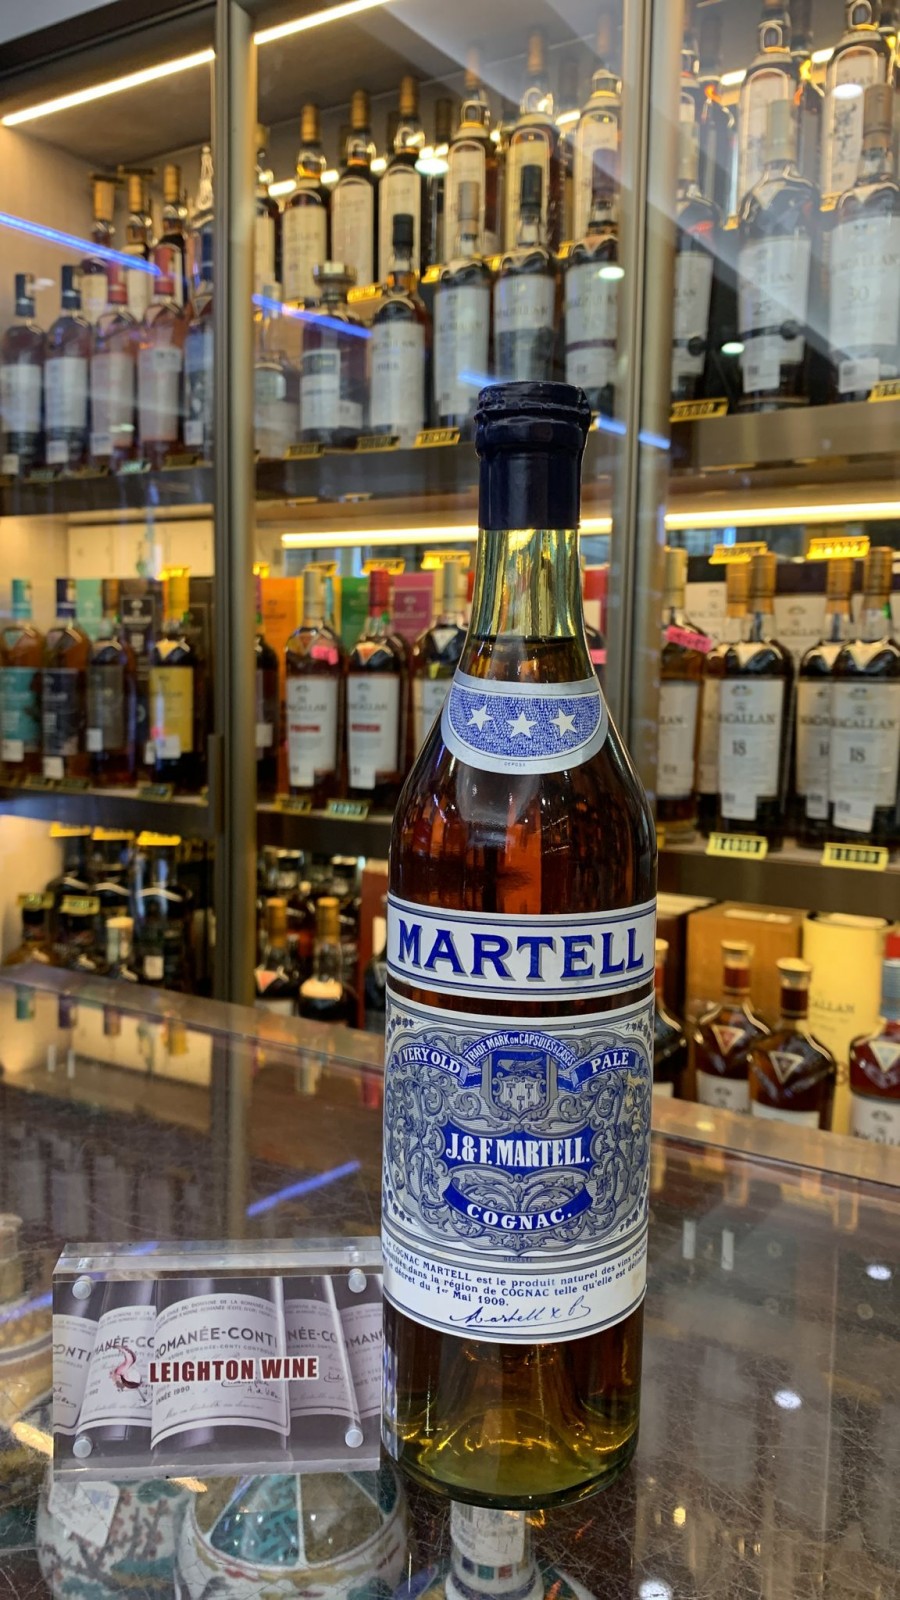 Martell Very Old Pale - 3 Star Cognac 1950's 